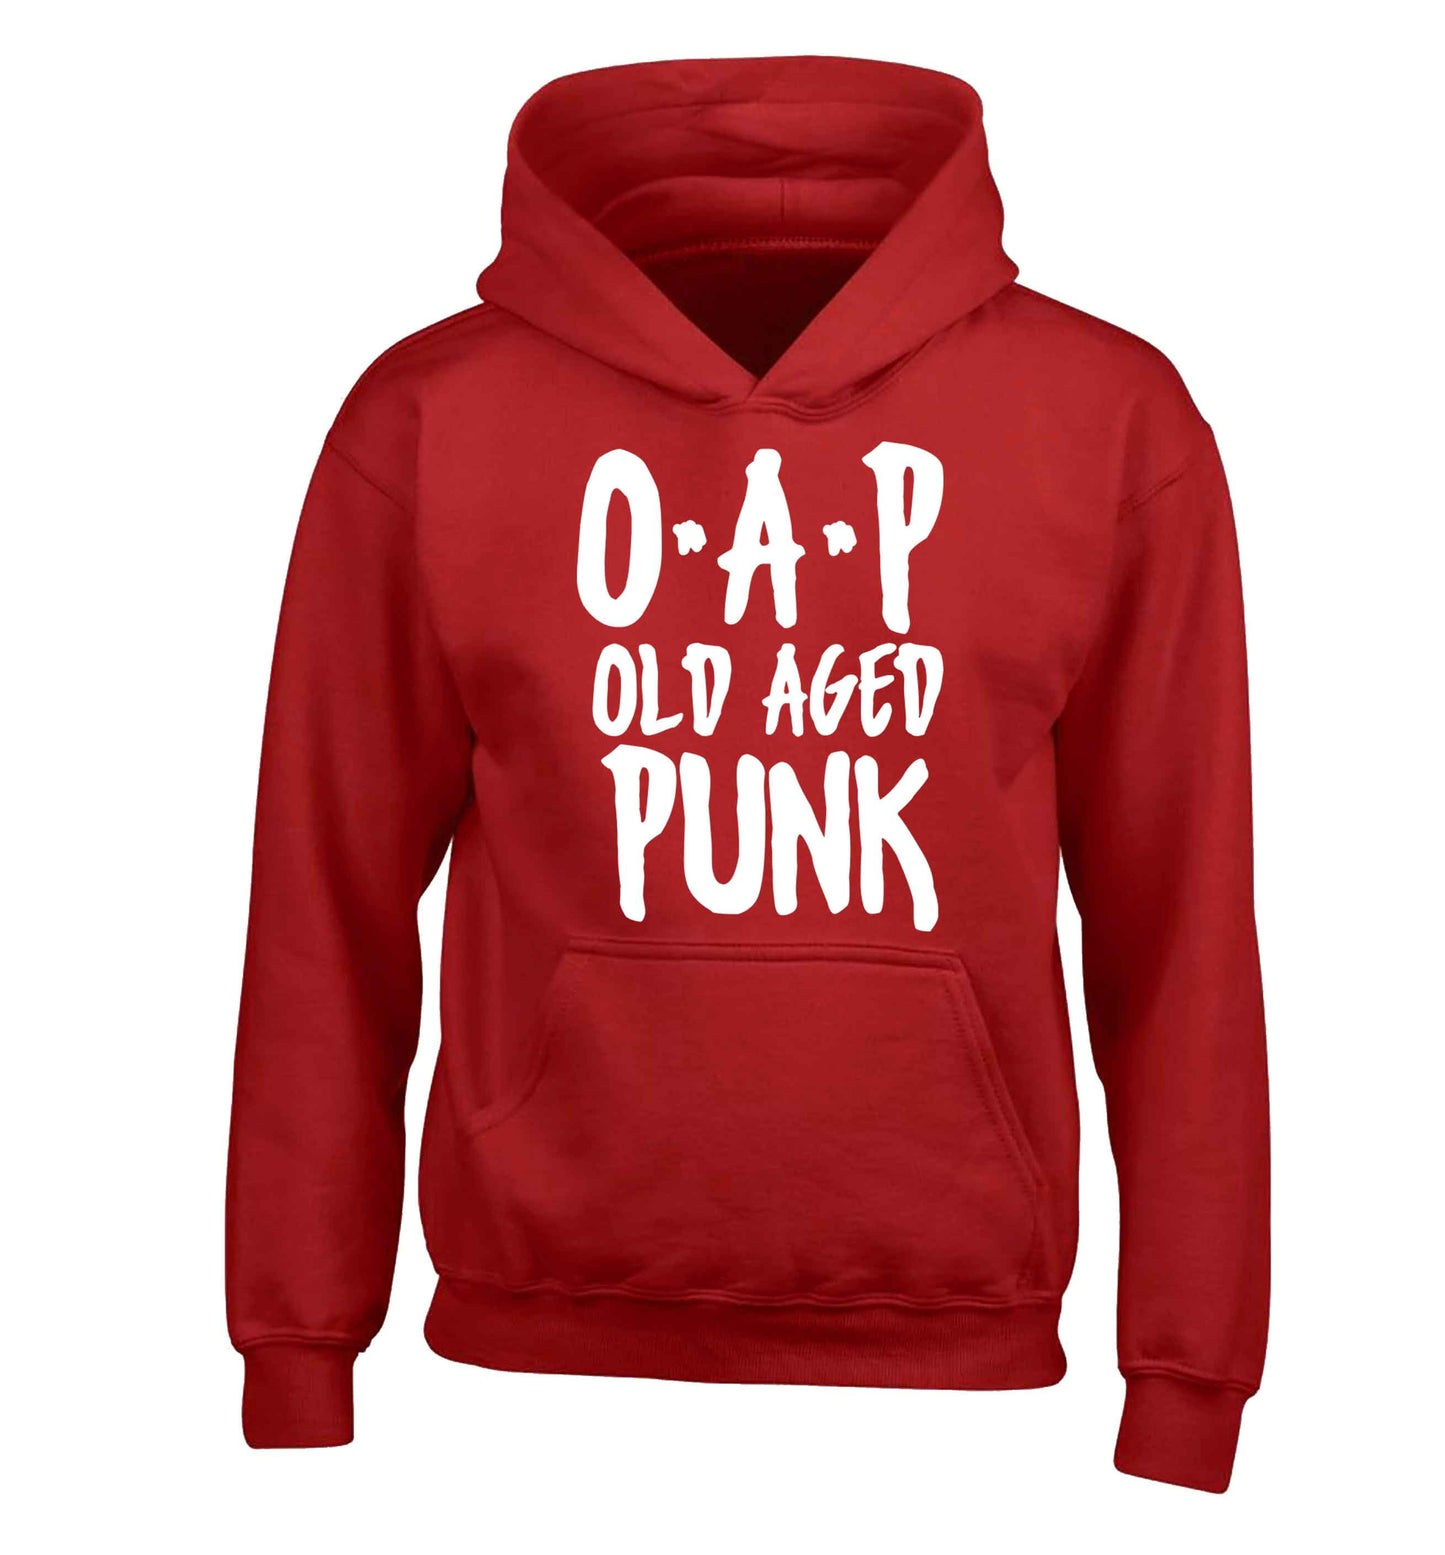 O.A.P Old Age Punk children's red hoodie 12-13 Years